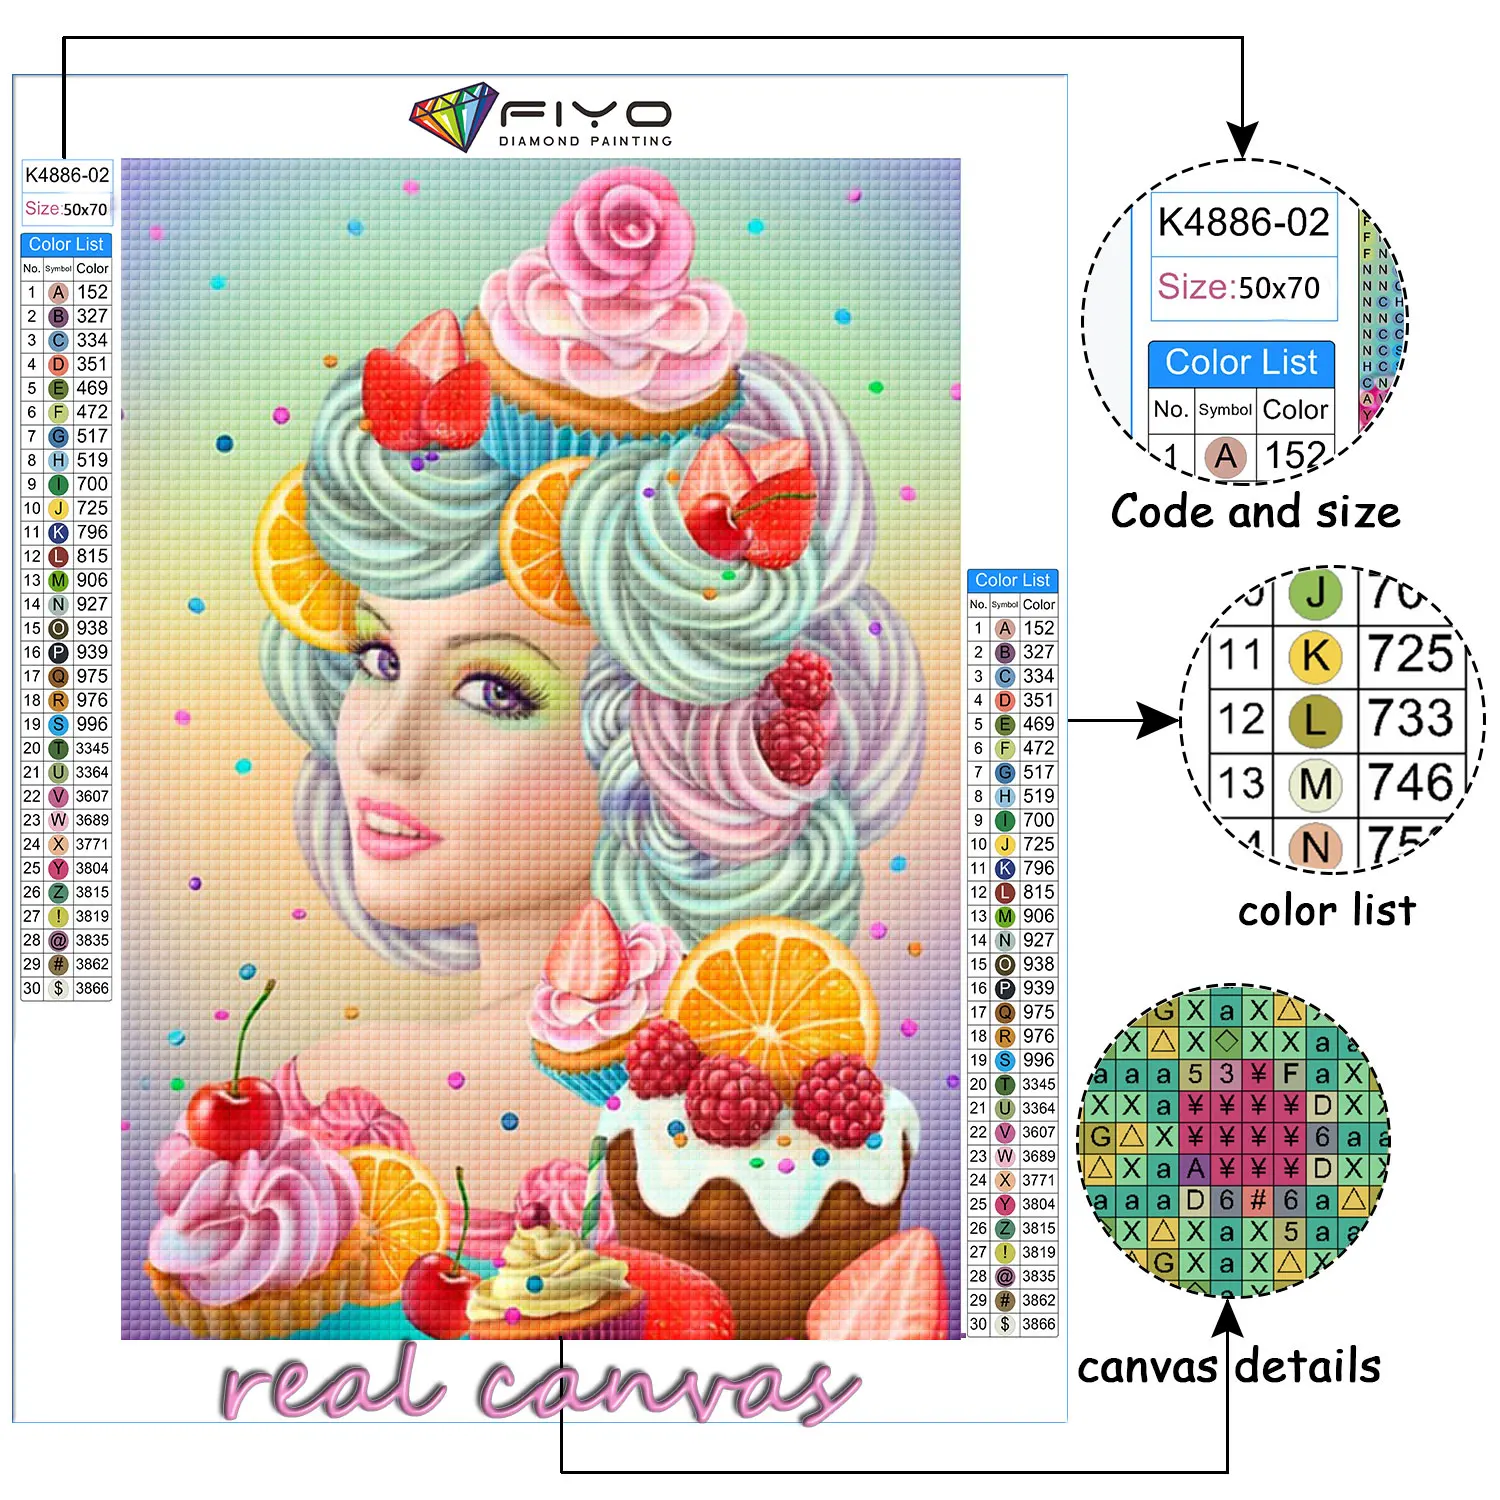 https://ae01.alicdn.com/kf/S043cbc17902e40d38438da32bec34197q/FIYO-Diamond-Painting-Fantasy-Girl-New-Collection-2022-Picture-Diamond-Mosaic-5D-DIY-Embroidery-Art-Cross.jpg